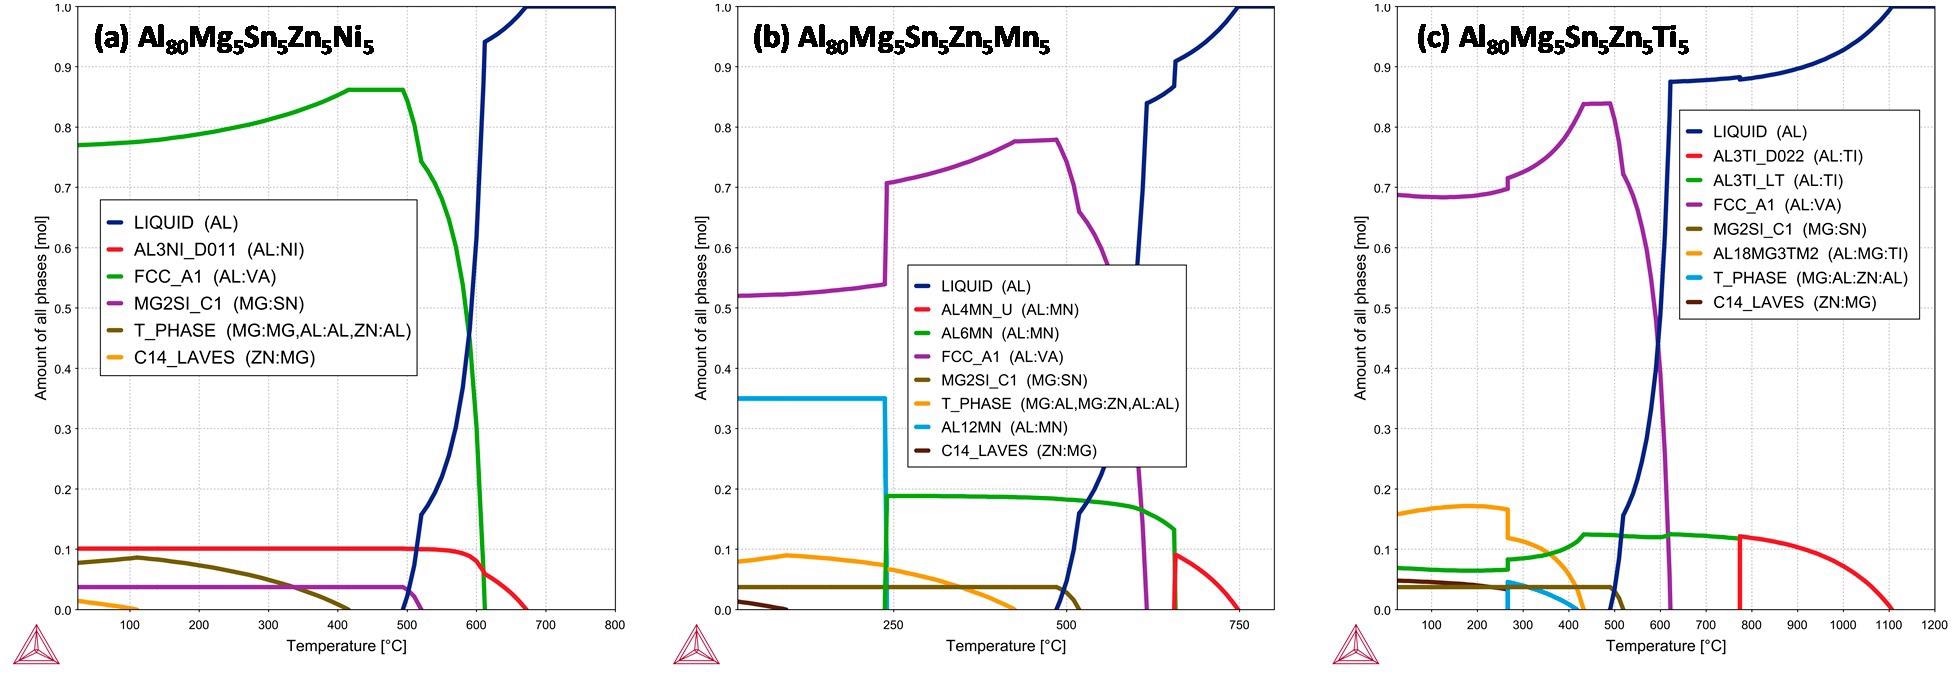 Equilibrium phase diagrams in function of temperature of the selected alloys (a) Al80Mg5Sn5Zn5Ni5; (b) Al80Mg5Sn5Zn5Mn5 and (c) Al80Mg5Sn5Zn5Ti5.